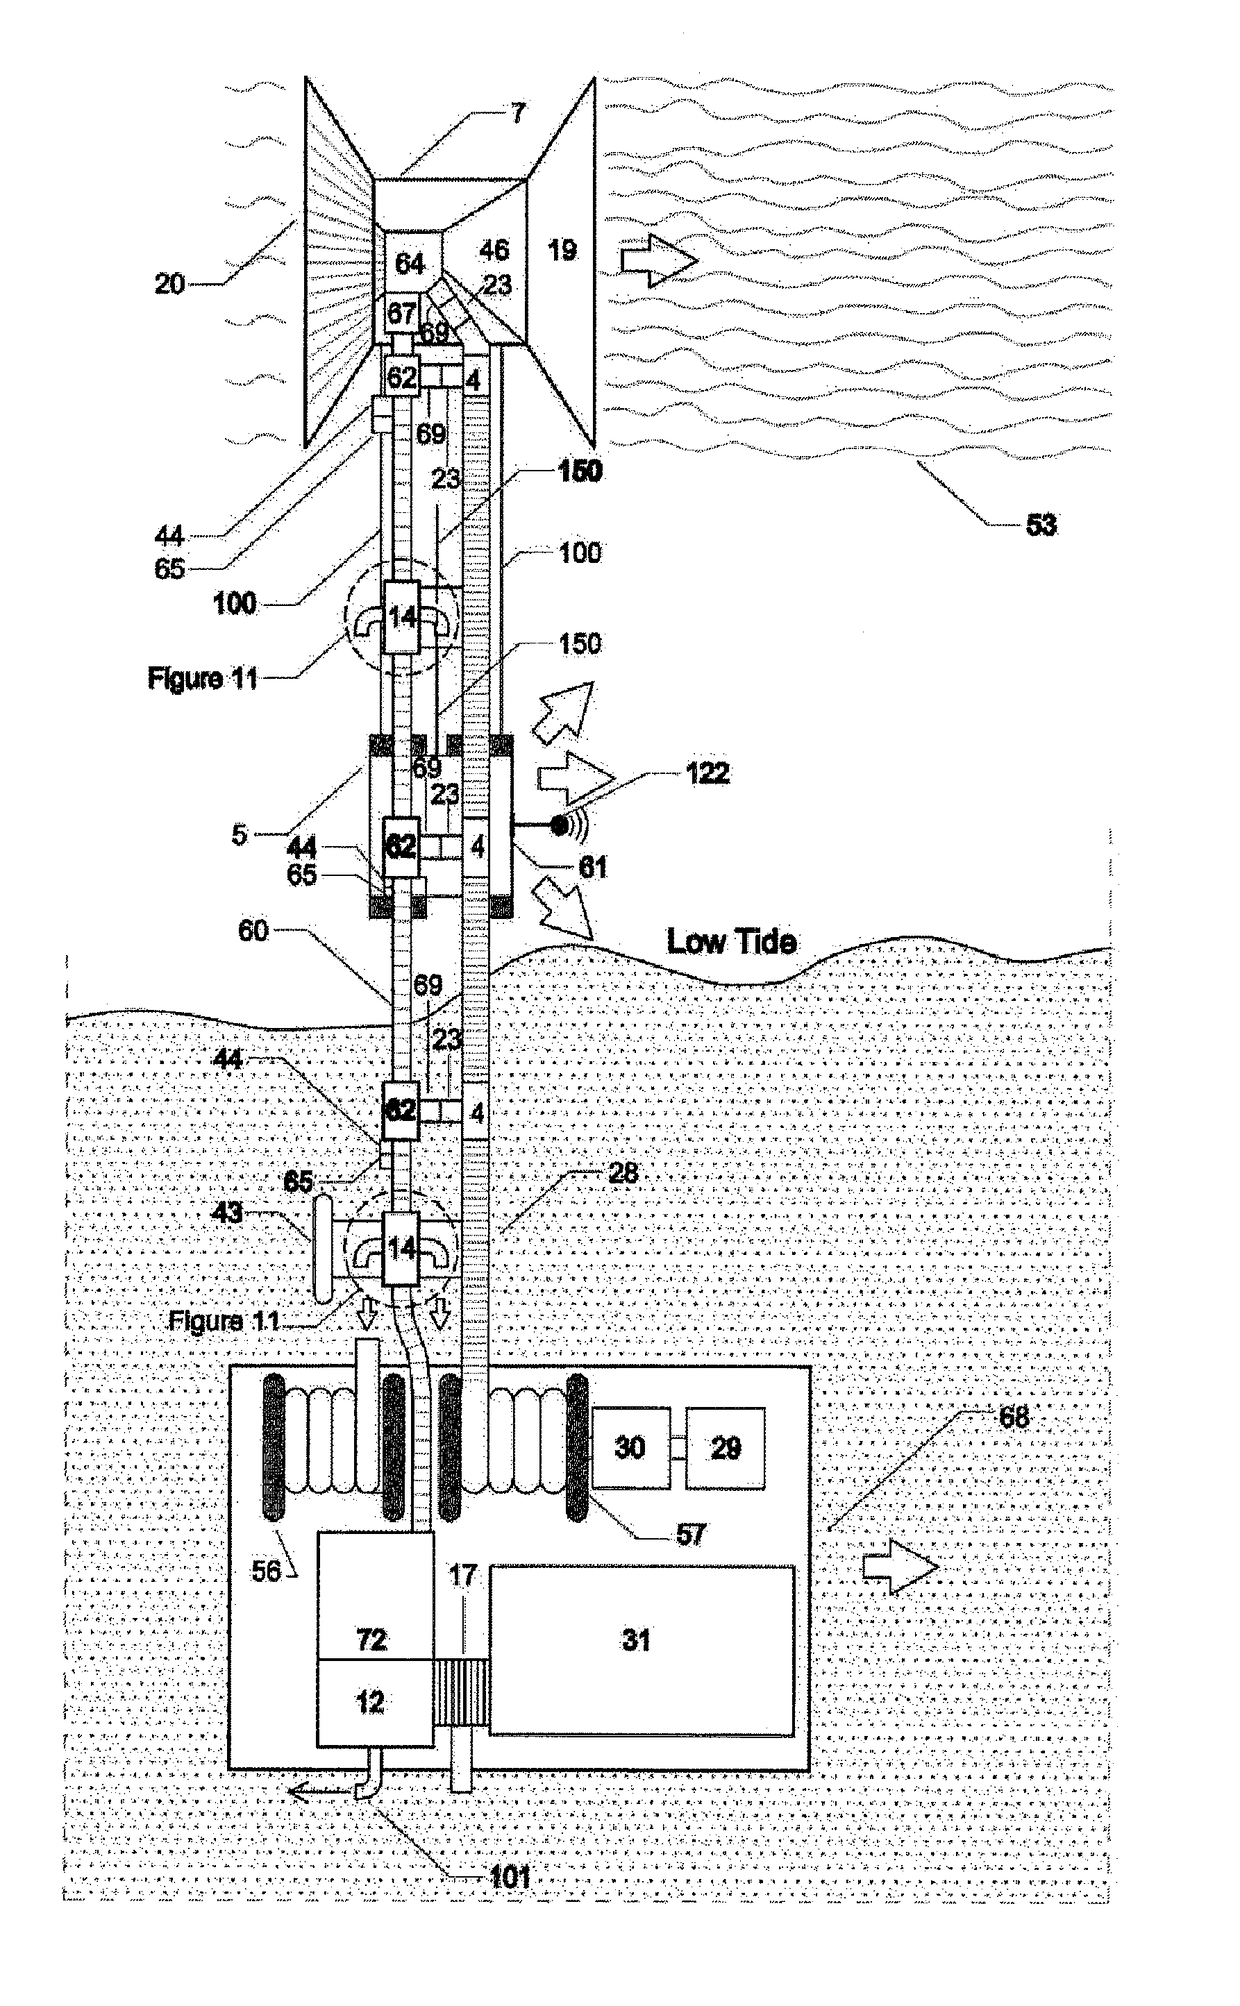 System for harvesting seaweed and generating ethanol therefrom